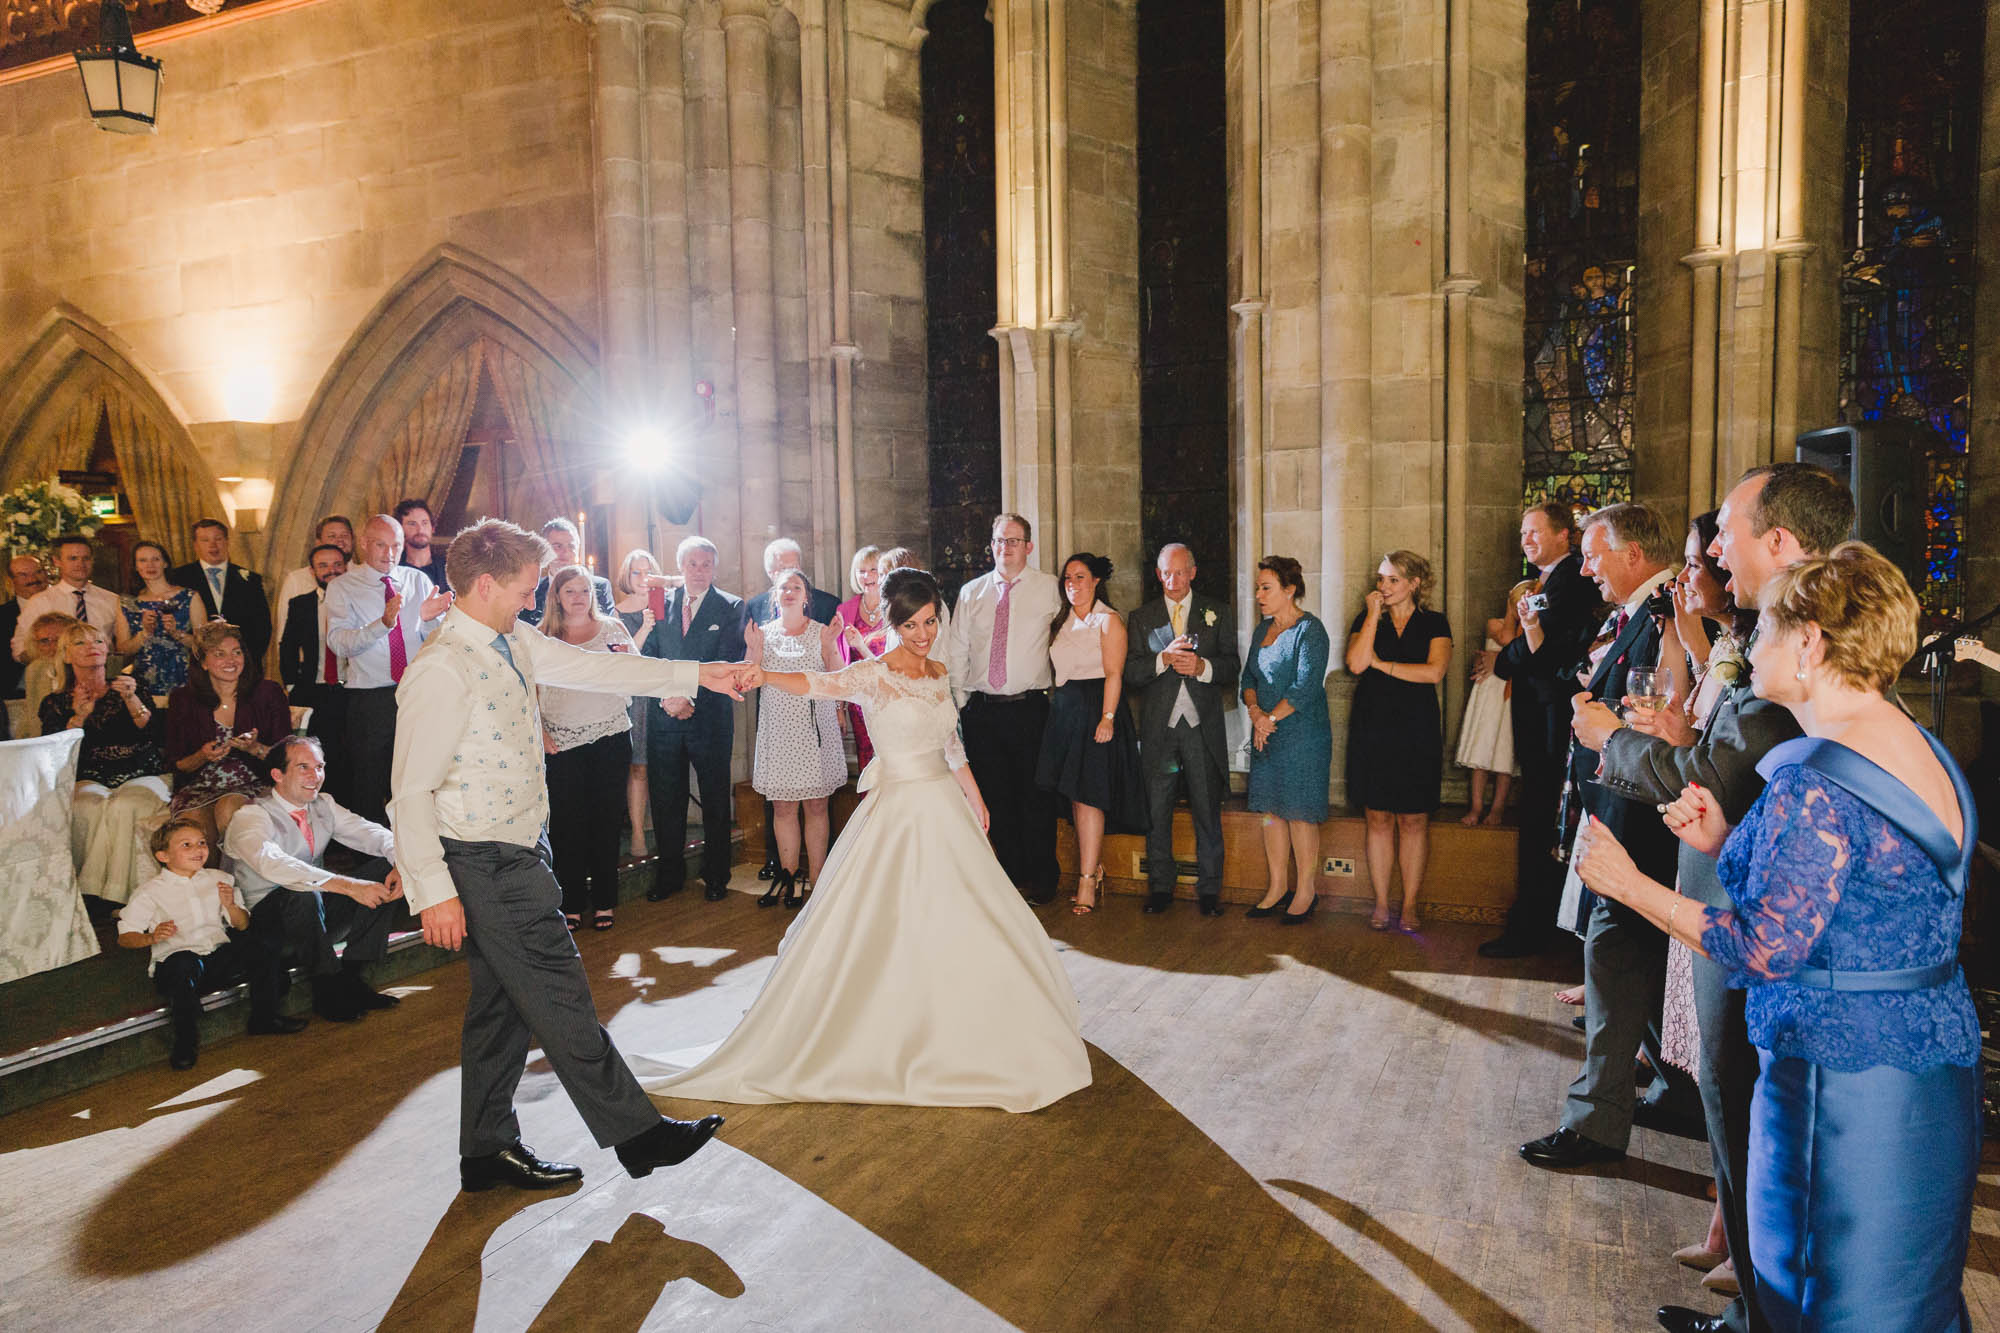 Bride and groom have their first dance together on their wedding day at Ashdown Park.